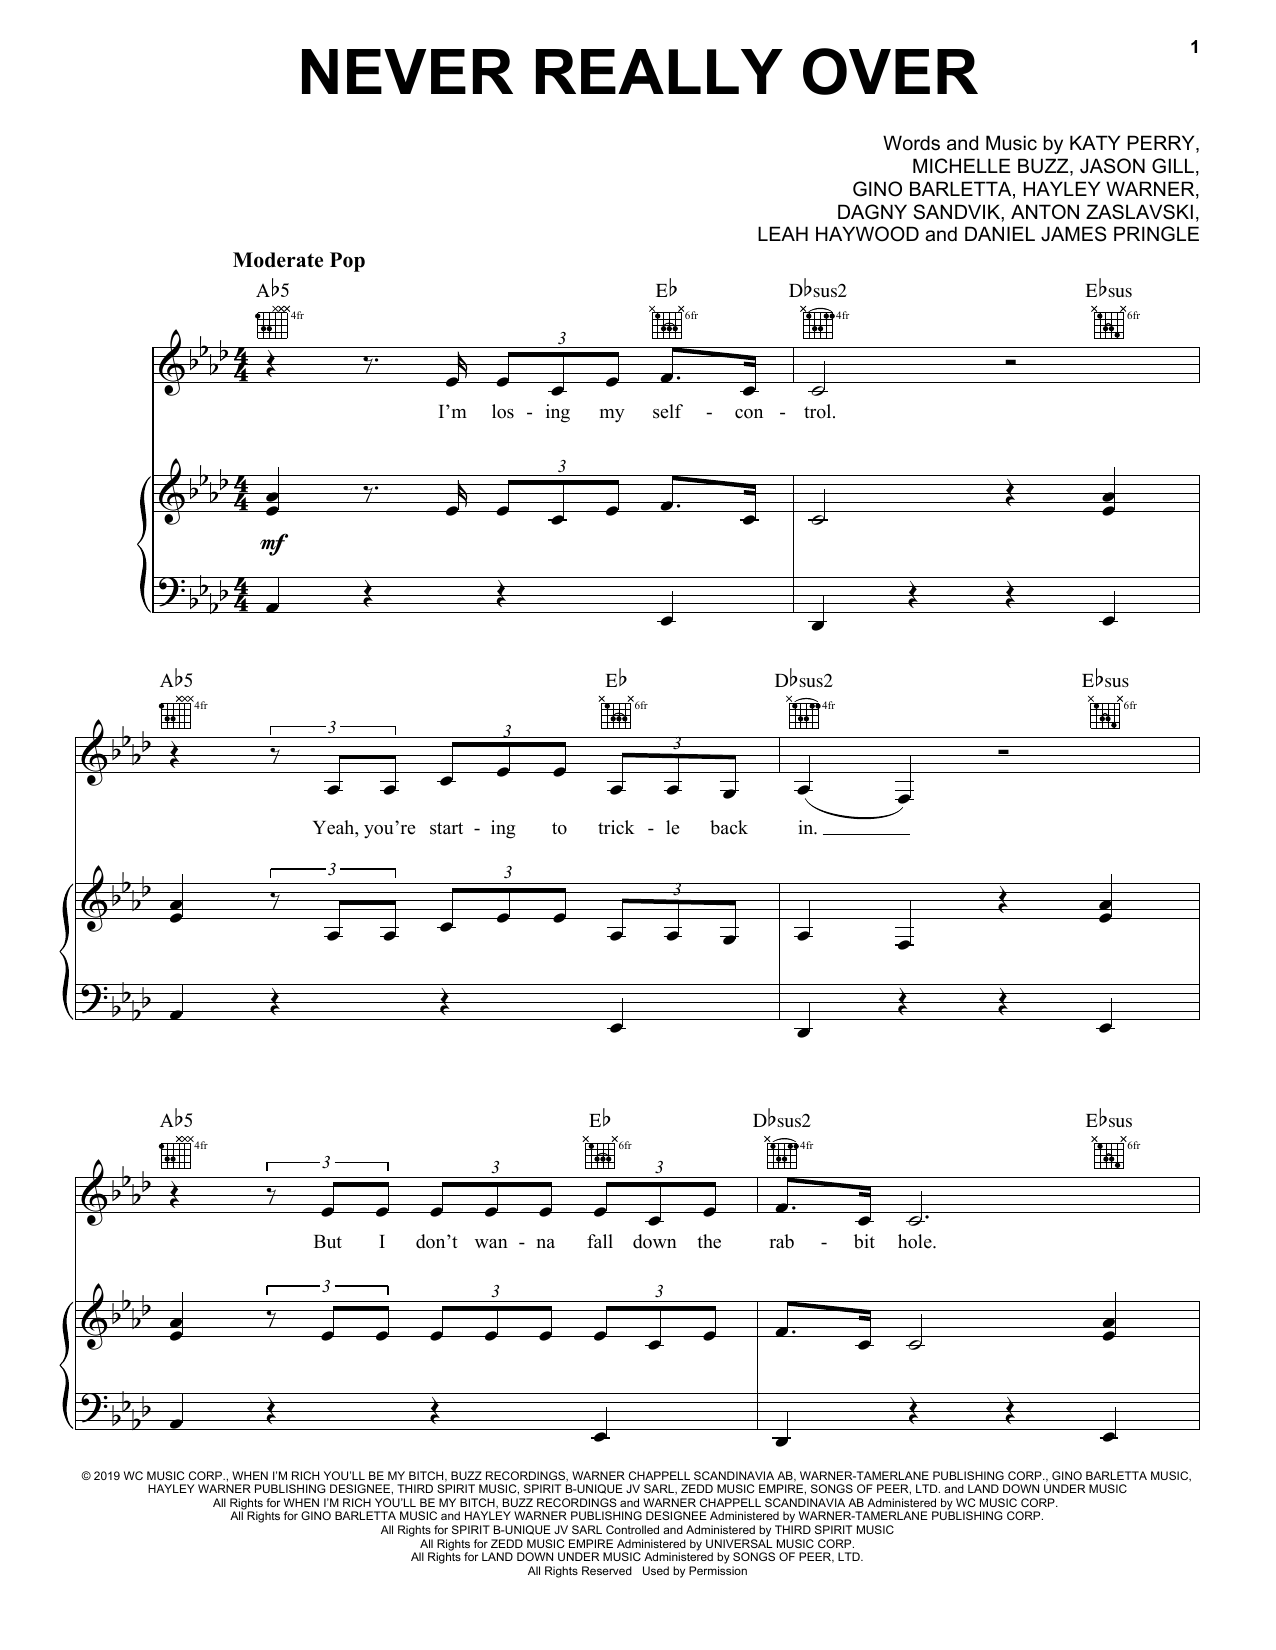 Katy Perry Never Really Over sheet music notes printable PDF score